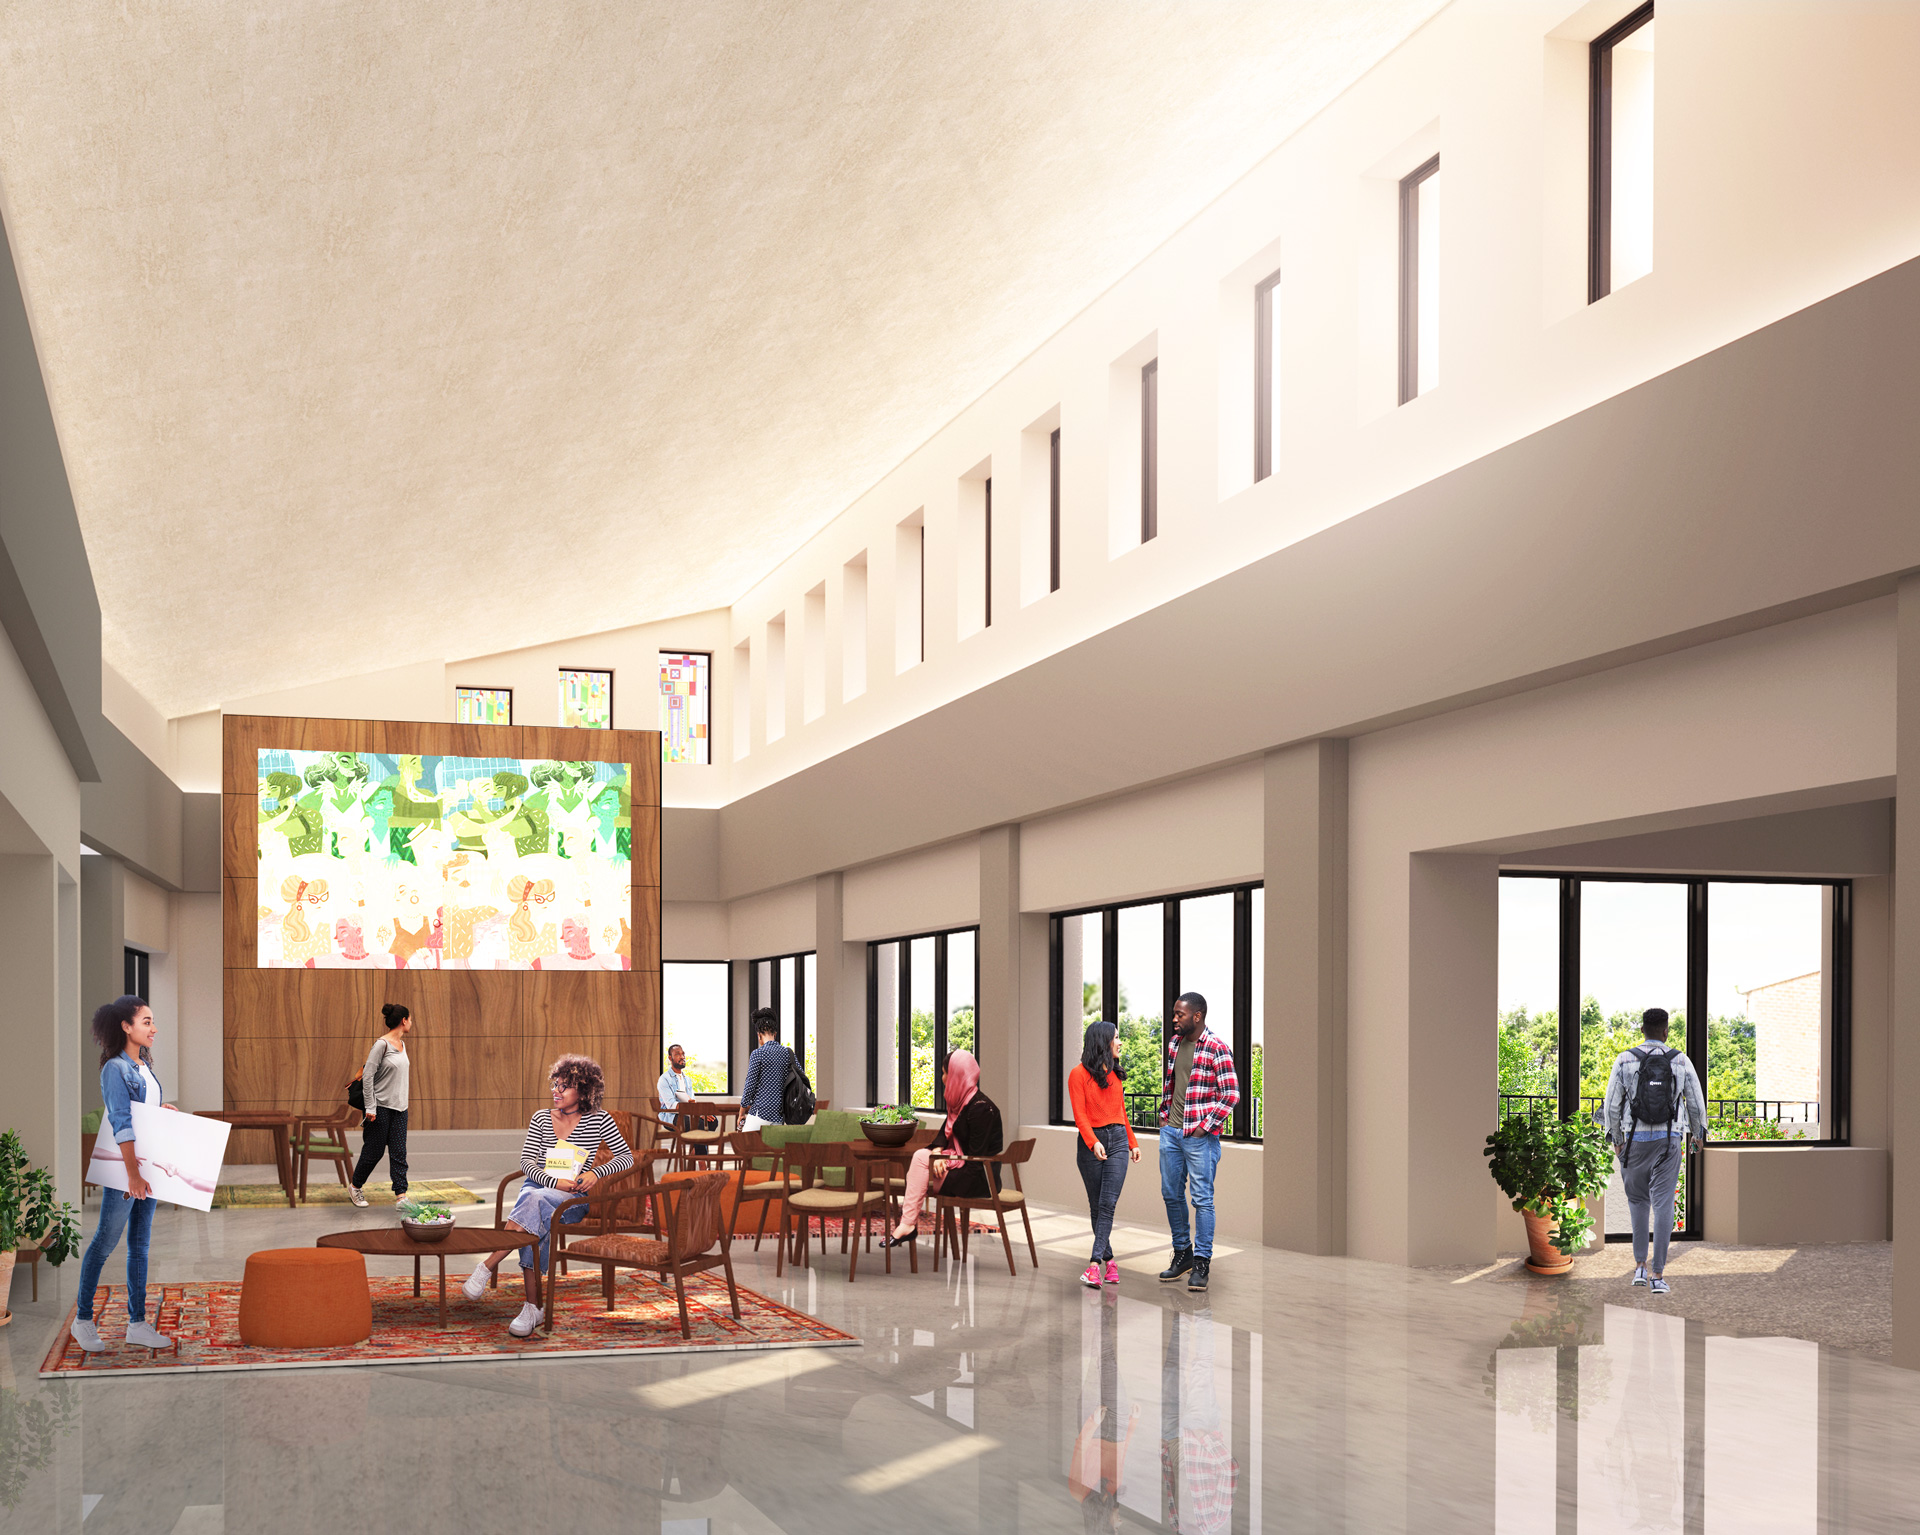 Rendering of the Phase 1 of The Center at Skidmore